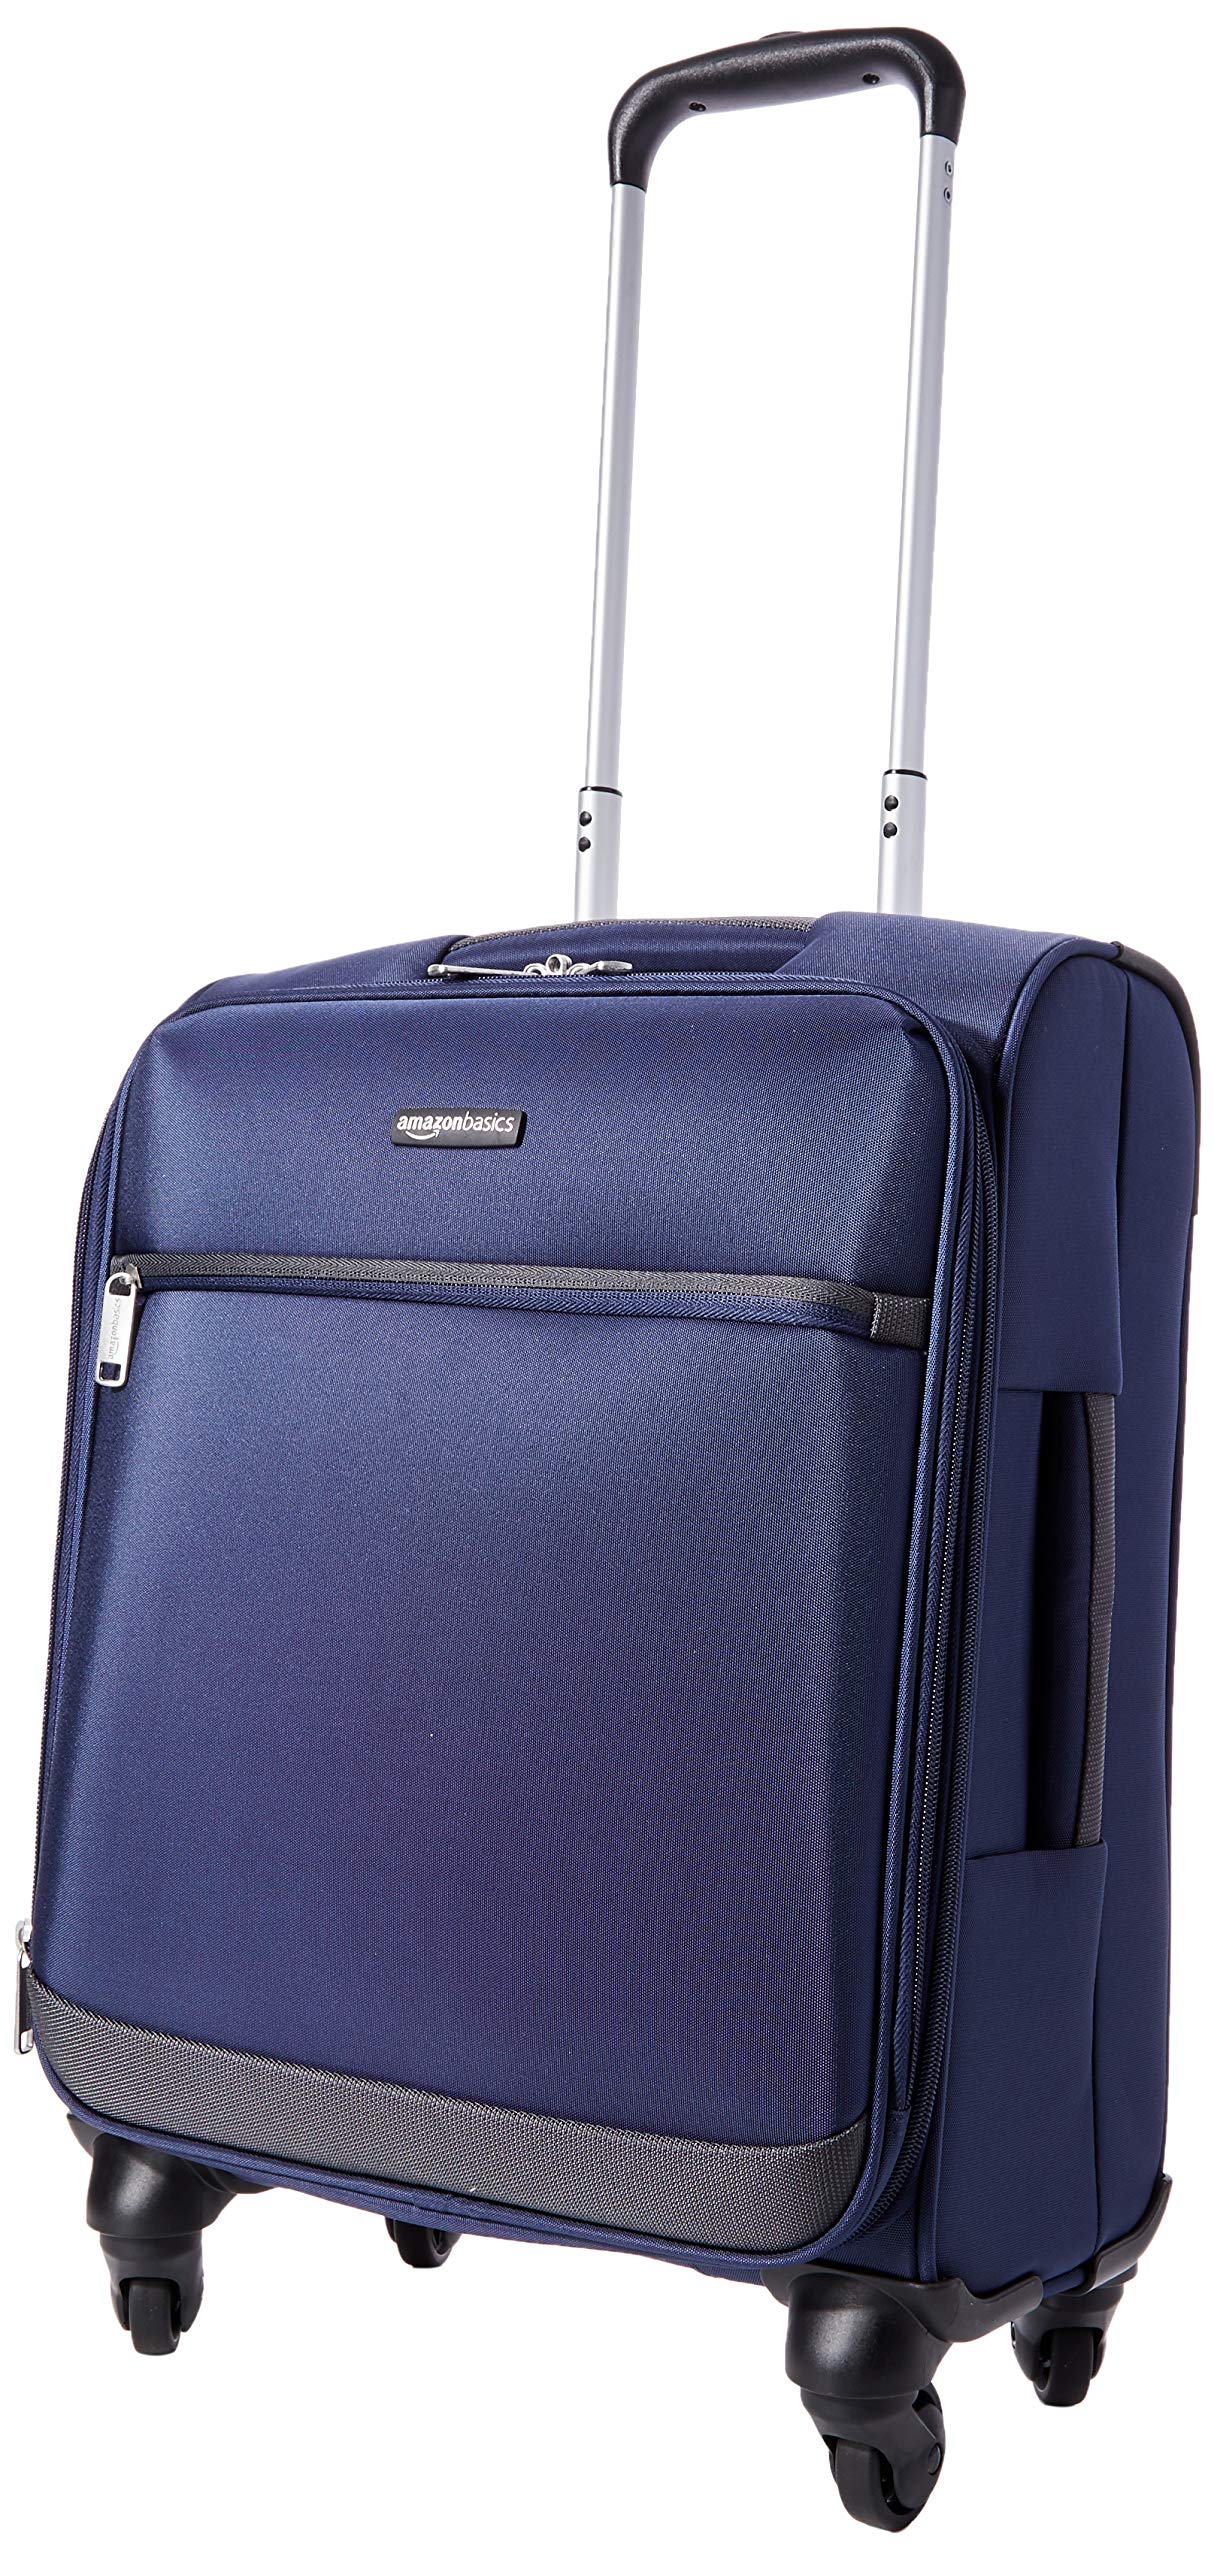 Metro Muscat Basics Softside Carry-On Spinner Suitcase - 21 Inch, Navy Blue